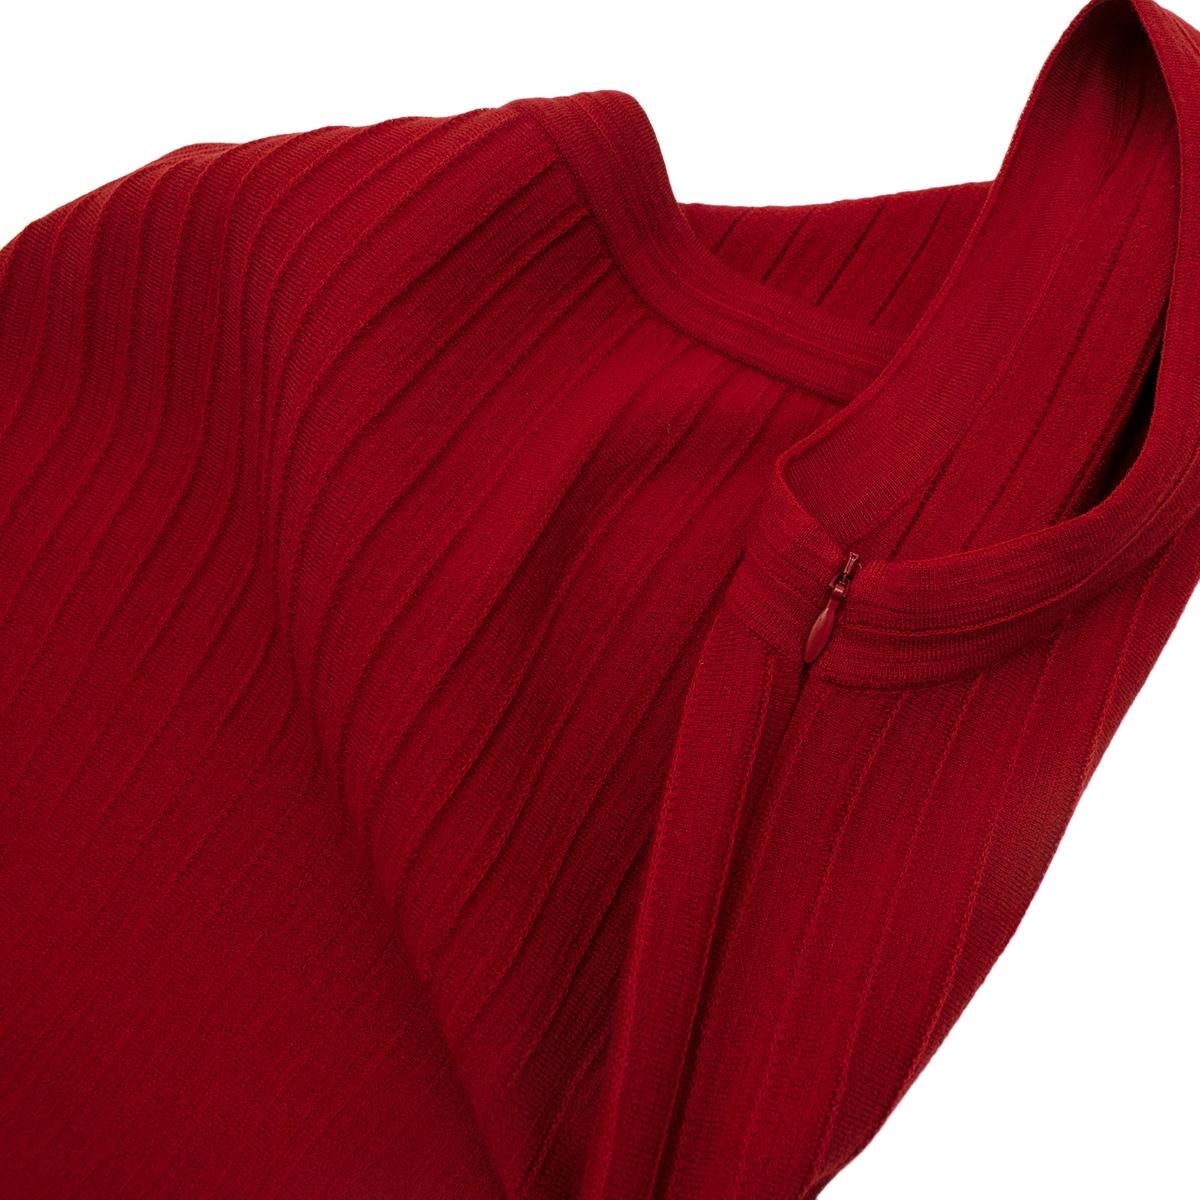 Alaia Red Stretch Knit Pleated Sleeveless Dress - Us size 10 1